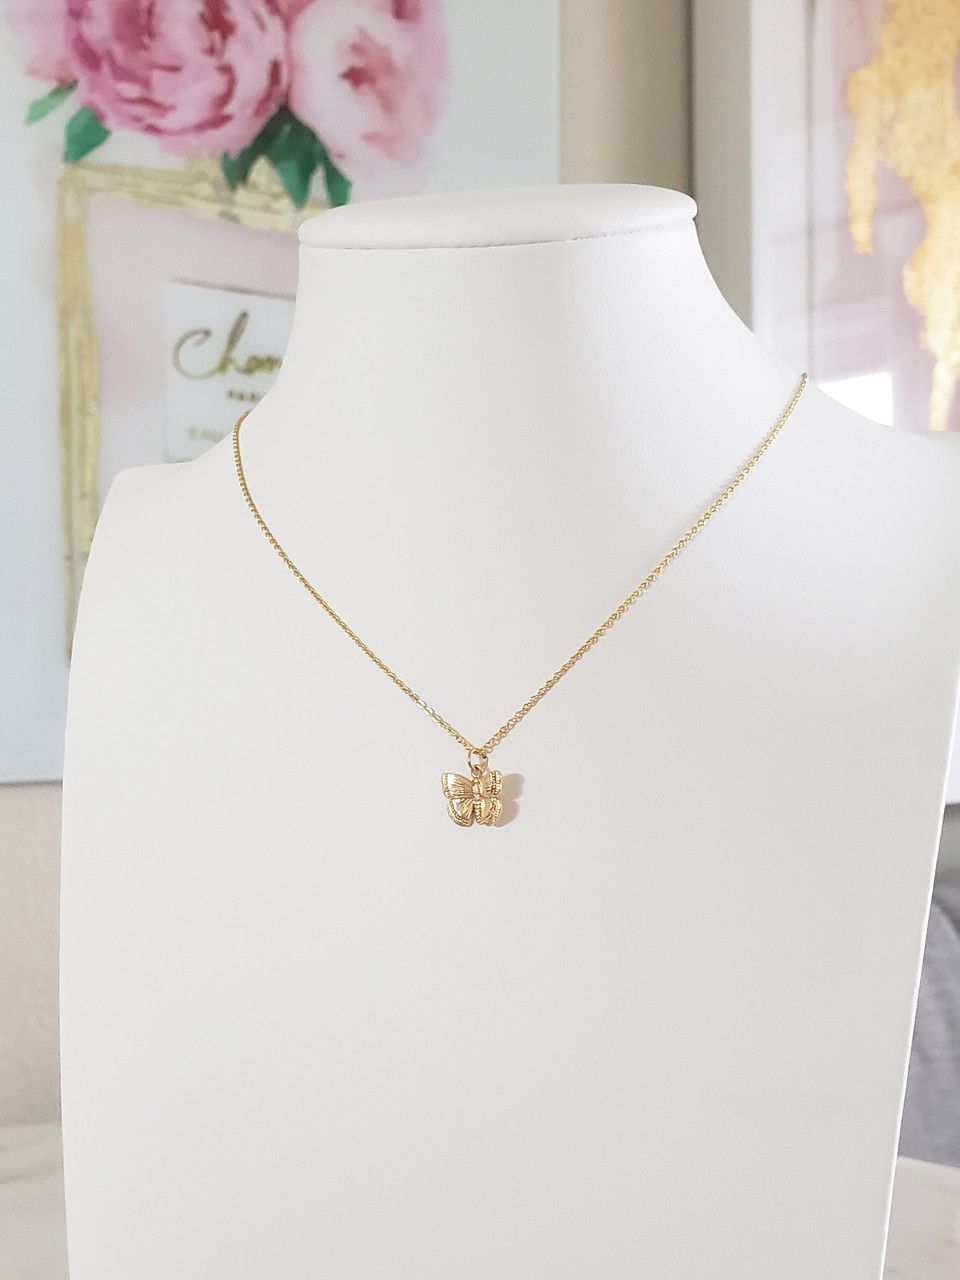 Nareyo 24k Gold Necklace Korean Gold Lucky Clover Pendant Necklace For  Women Wedding Party Jewelry Gifts - AliExpress